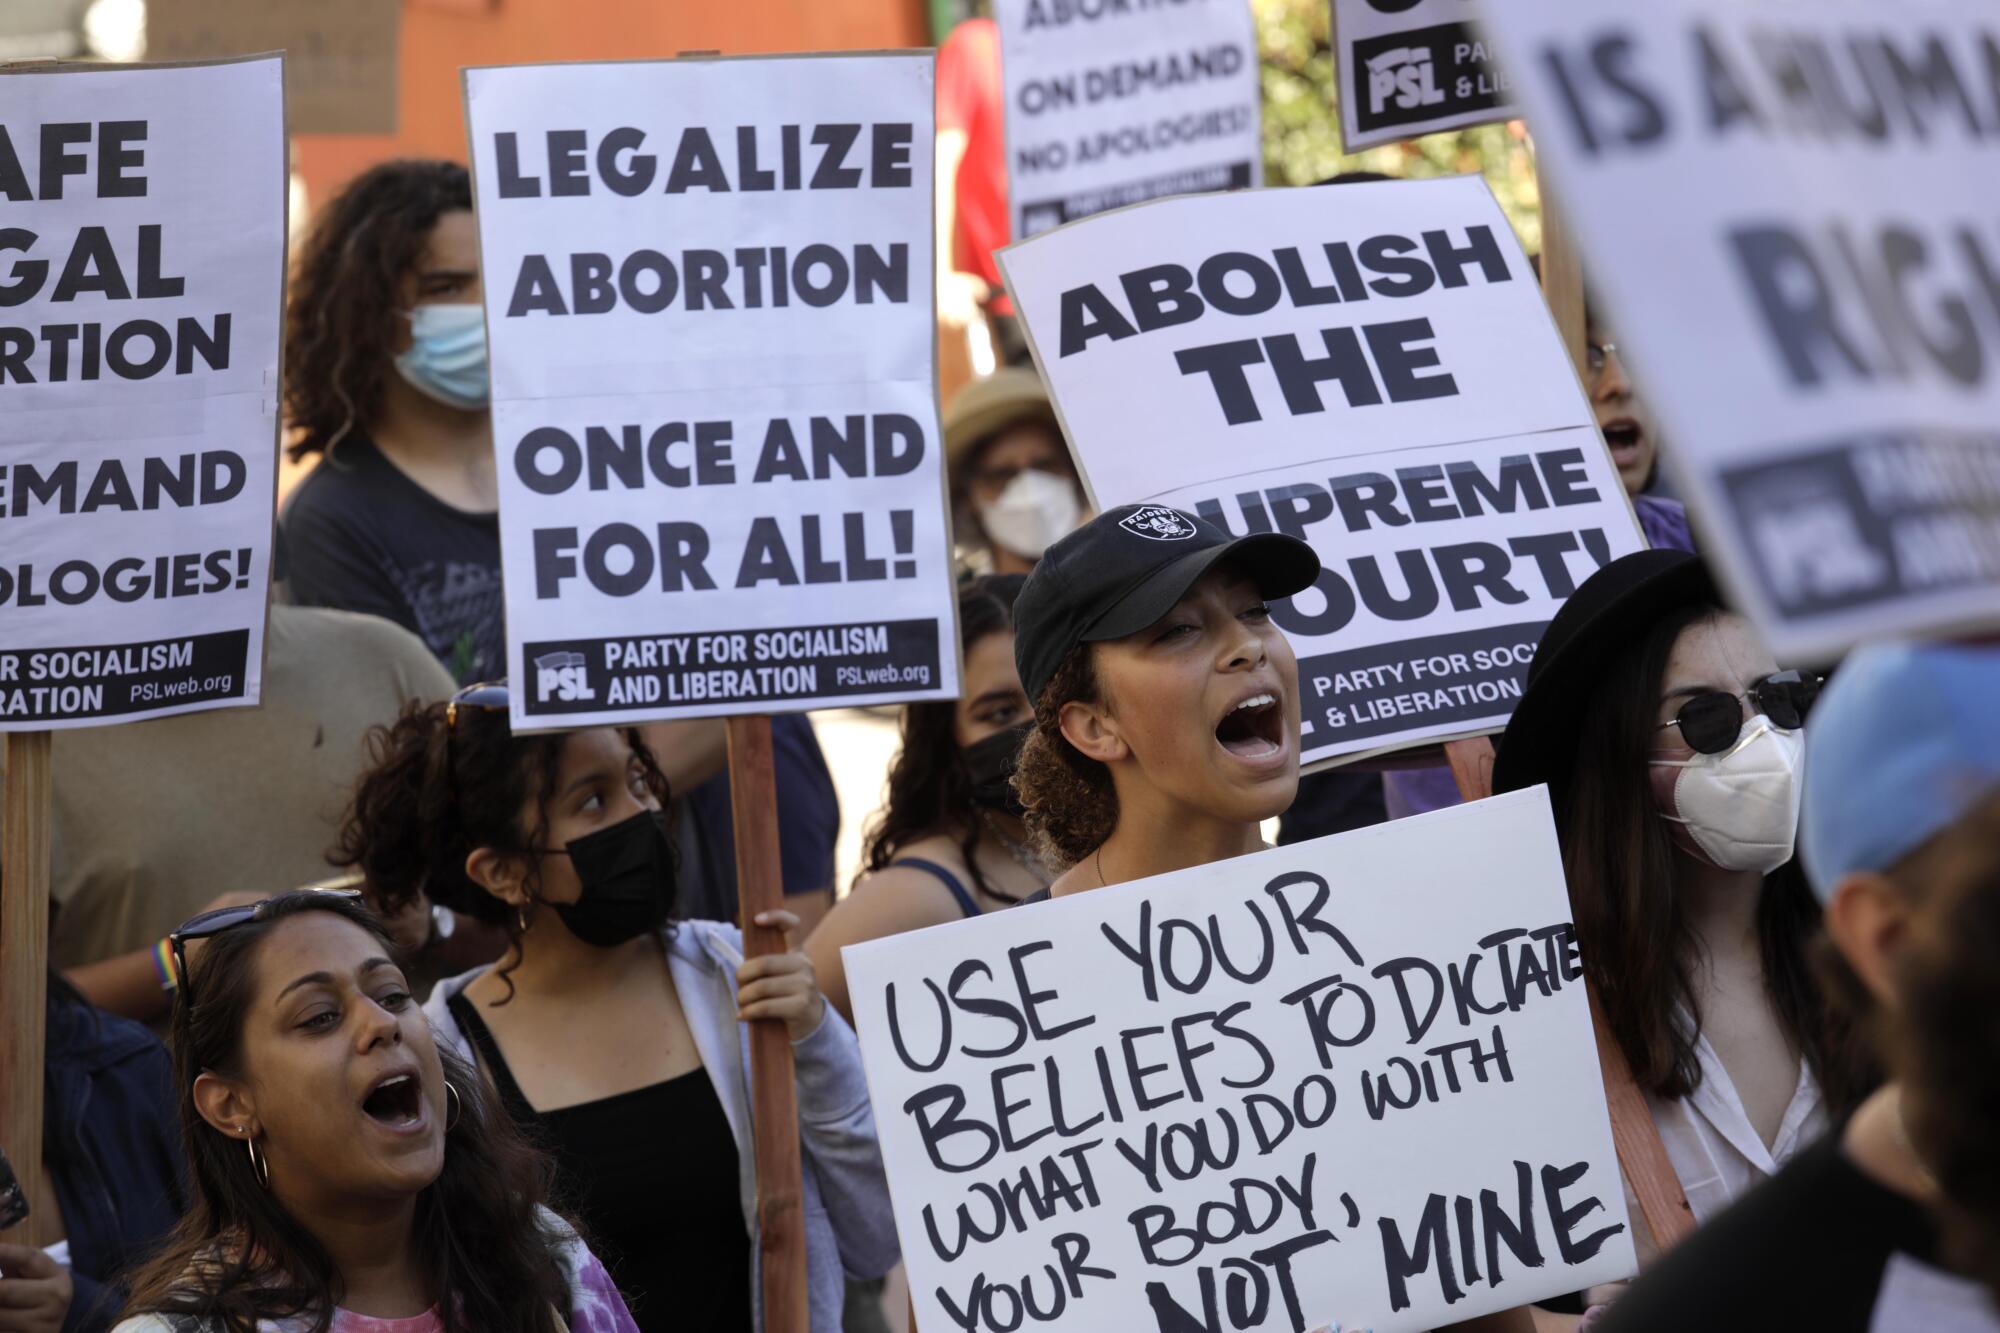 Abortion-rights supporters hold signs and shout